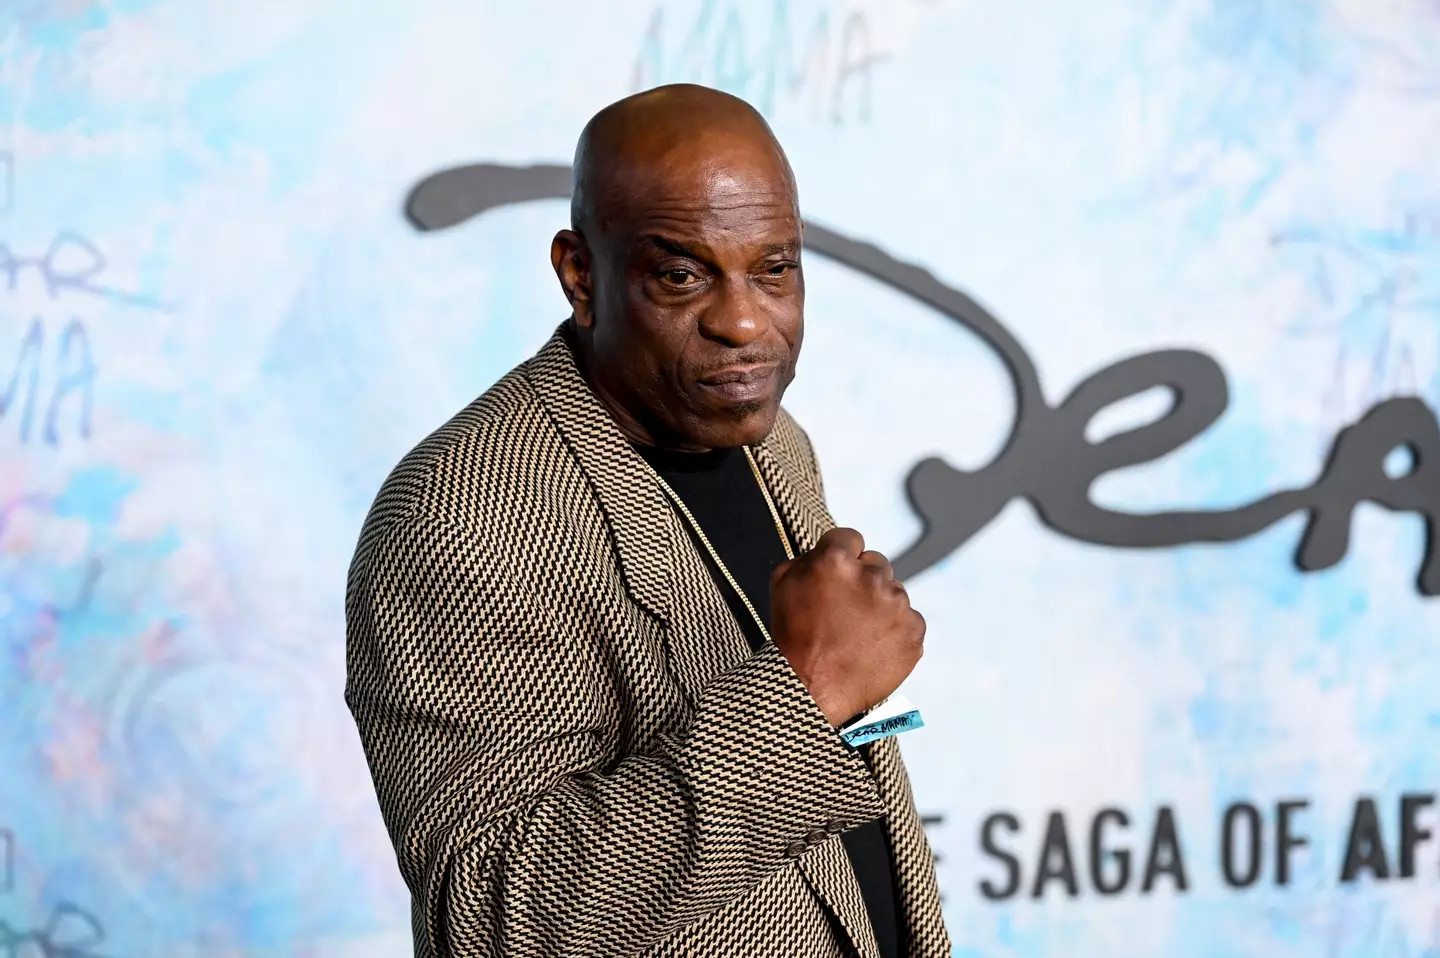 Tupac's stepbrother, Mopreme Shakur, has spoken out following the news of Davis' arrest.